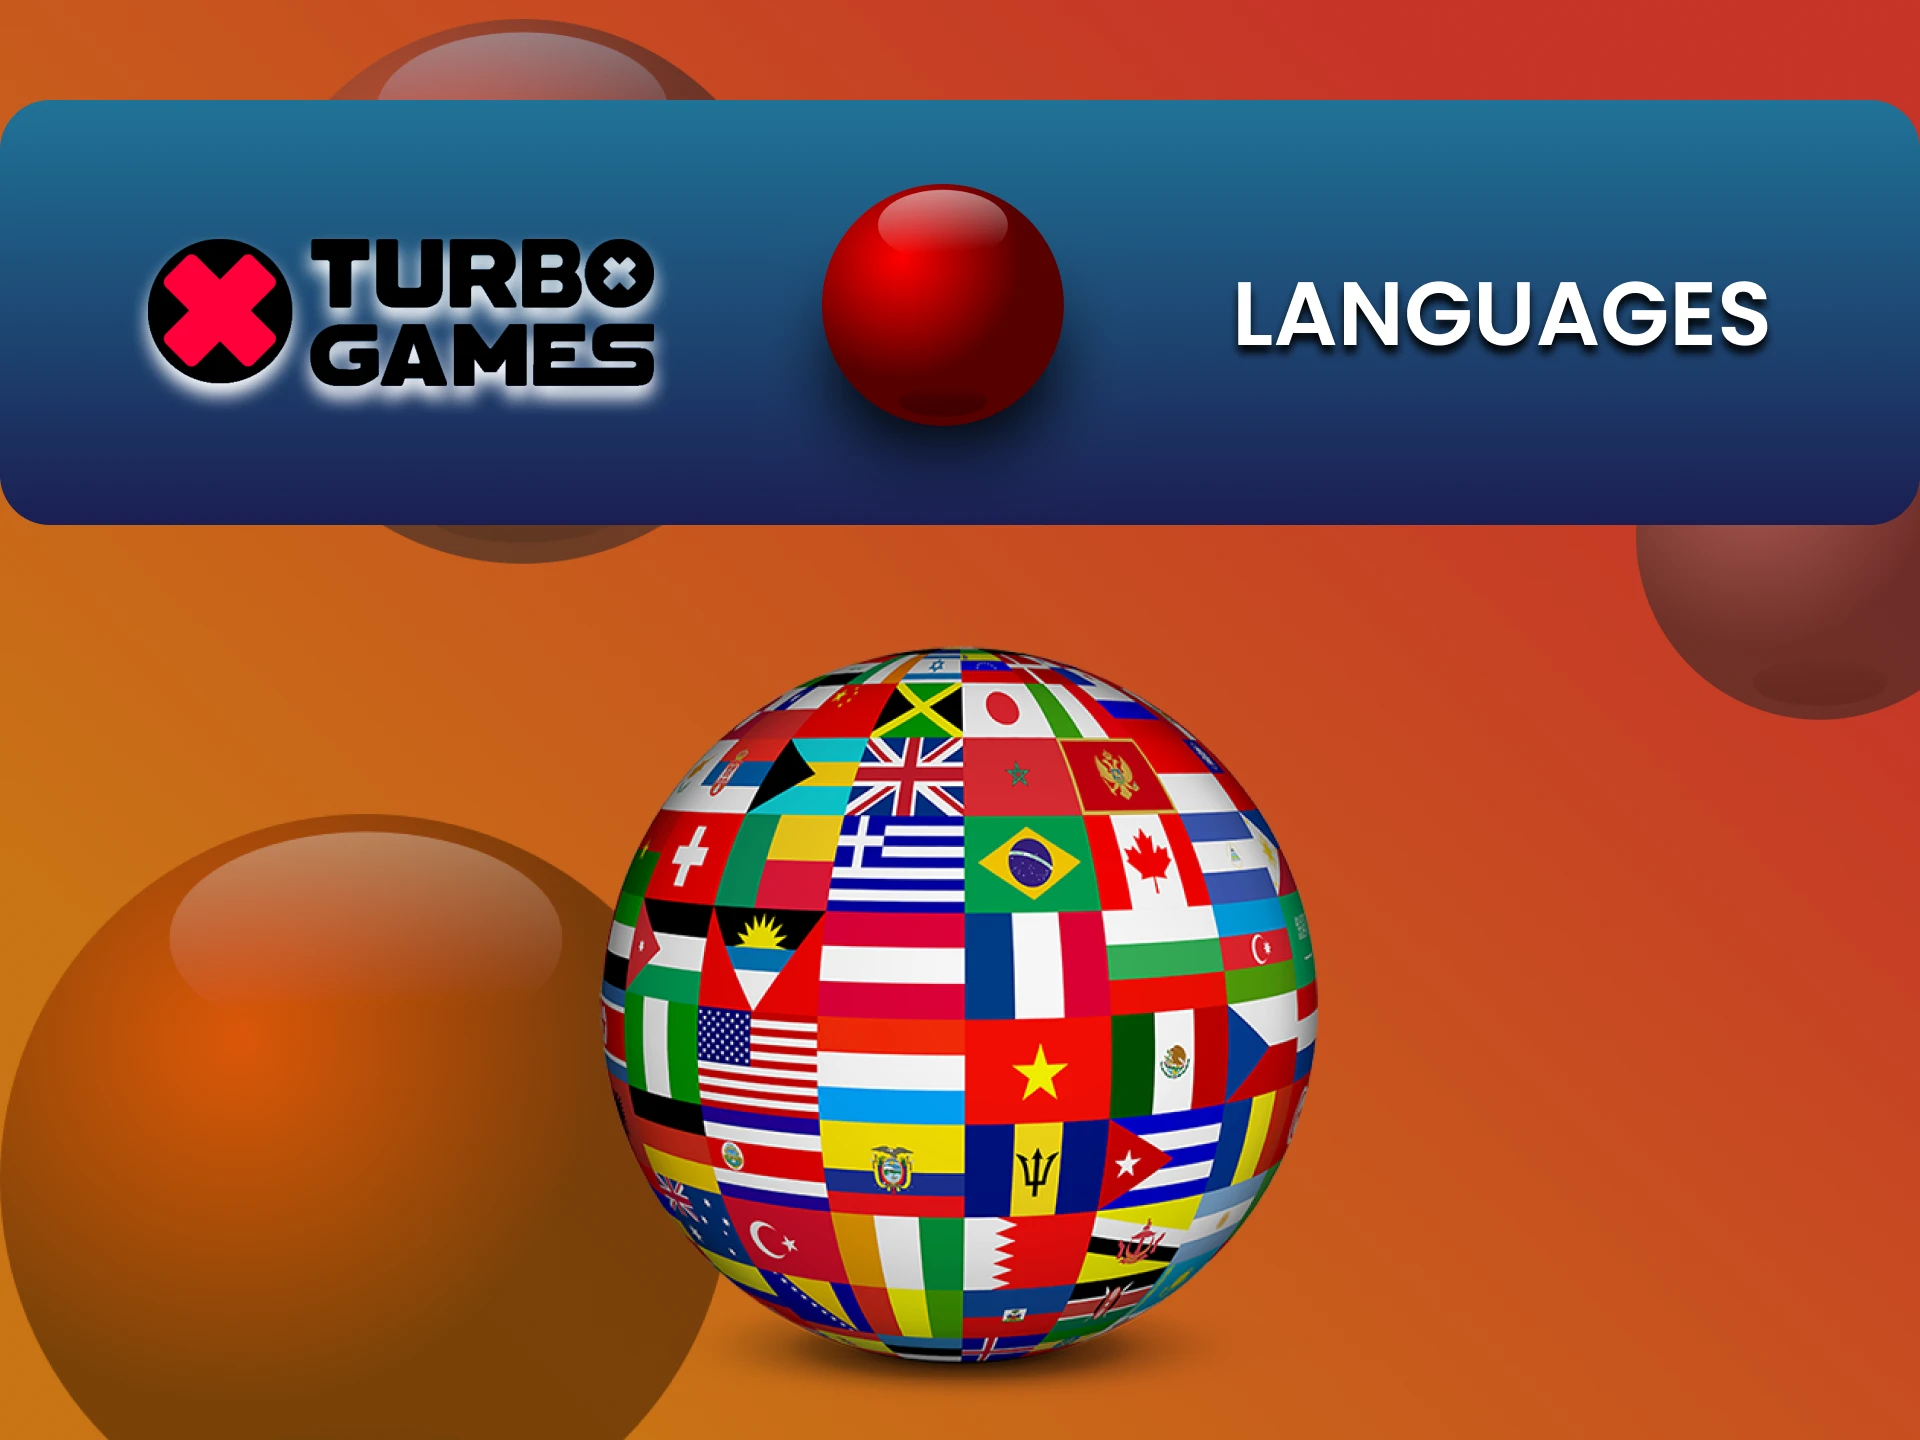 In Turbo Games games you can choose the language that suits you best.